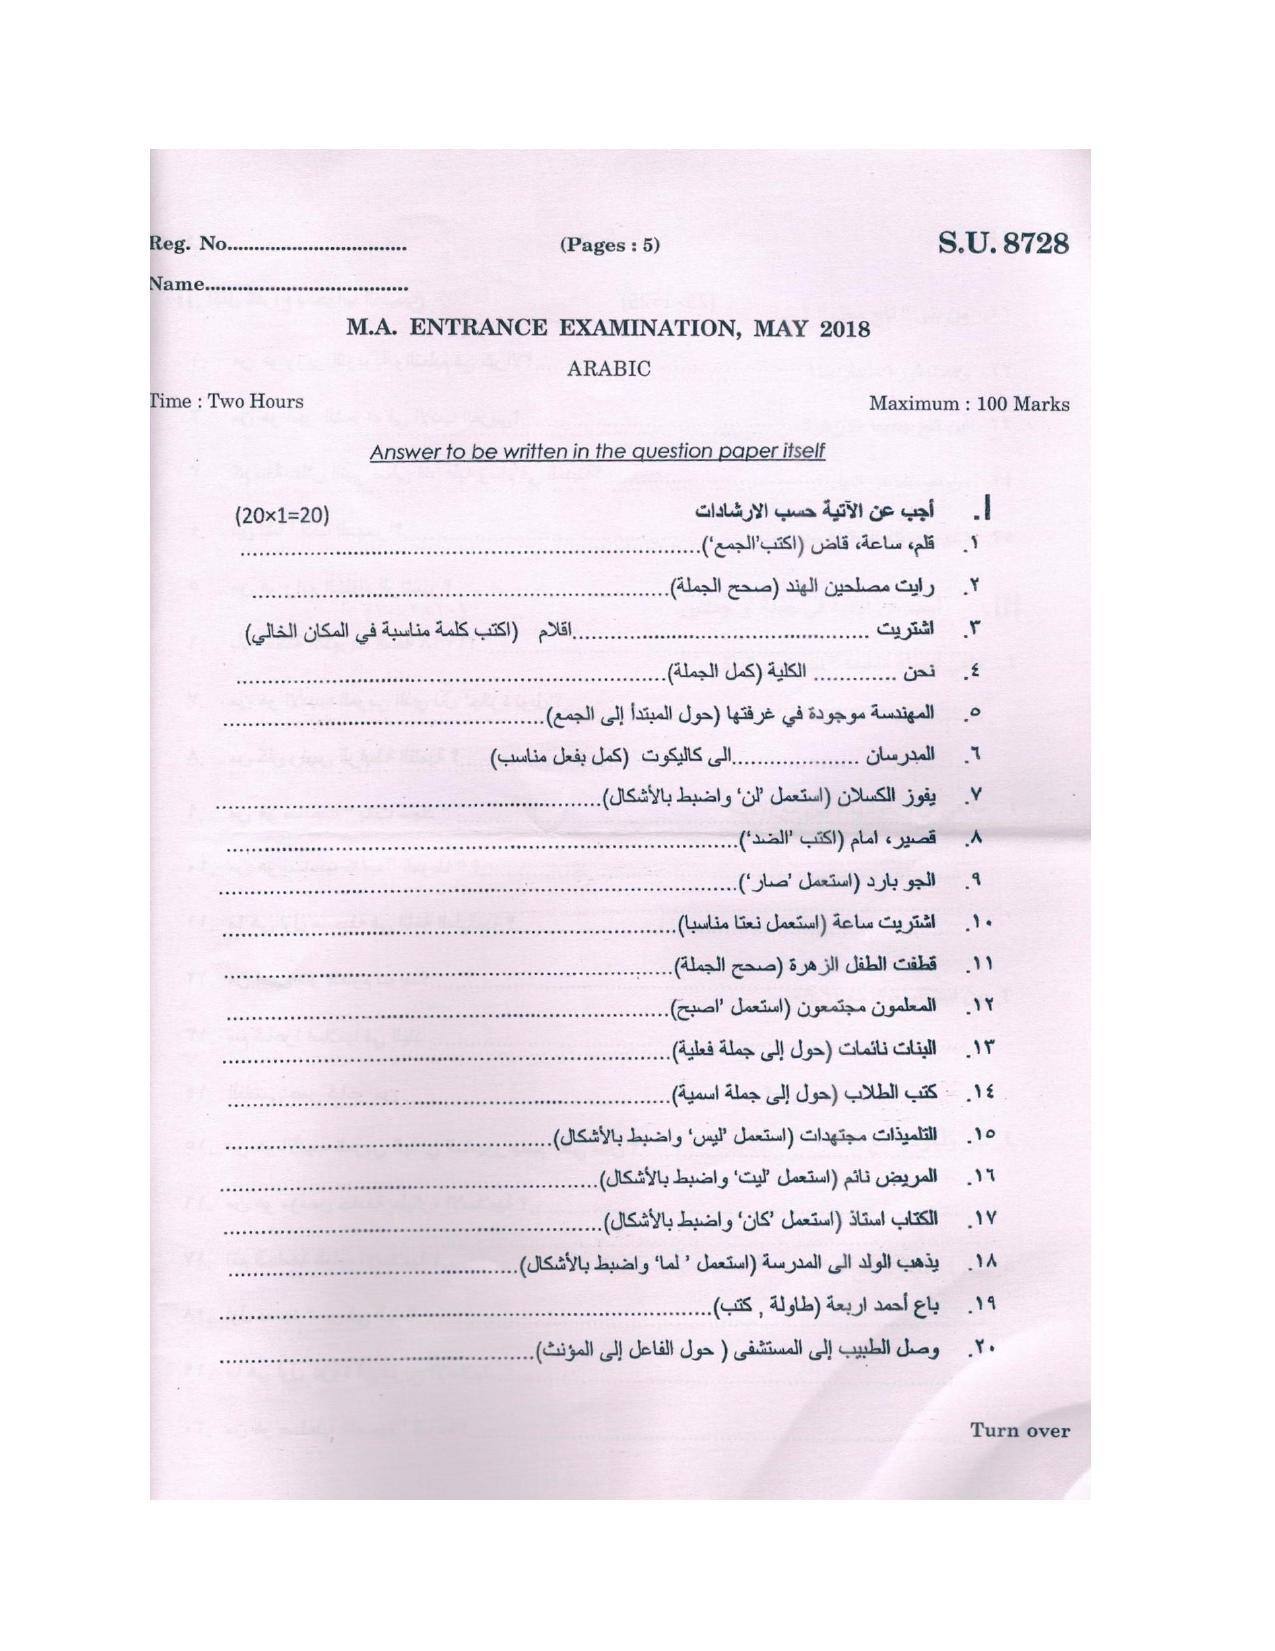 SSUS Entrance Exam ARABIC 2018 Question Paper - Page 1